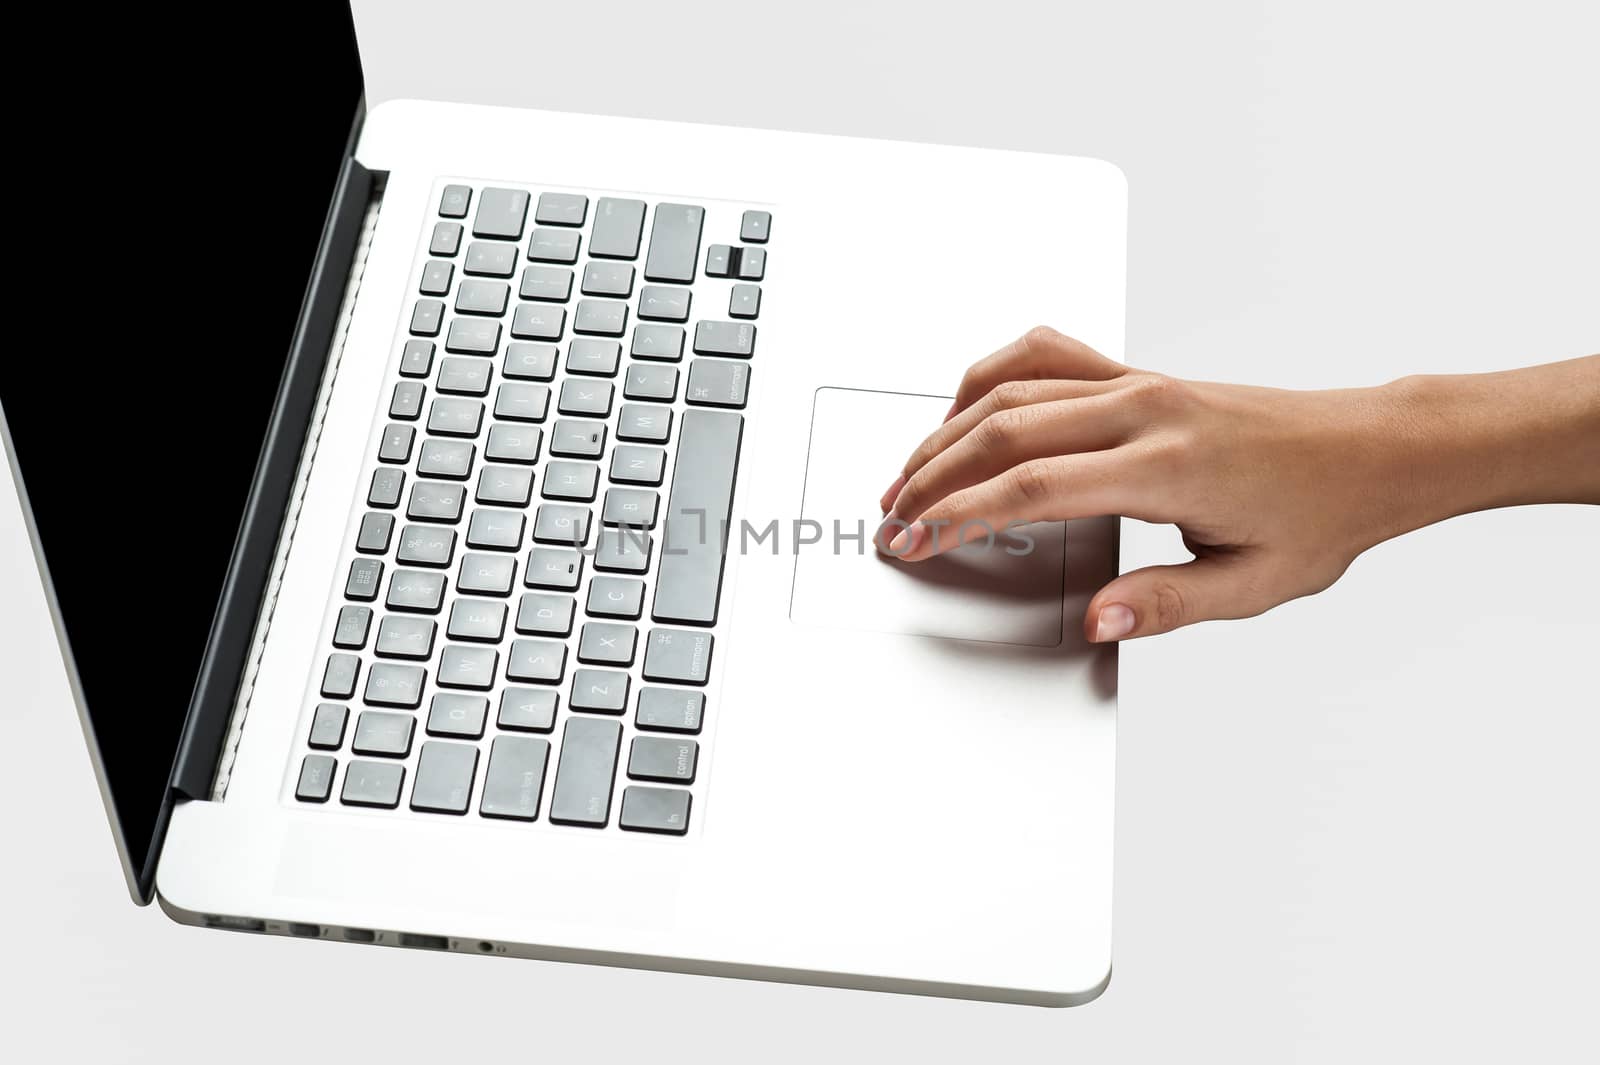 Hand operating on laptop's track pad